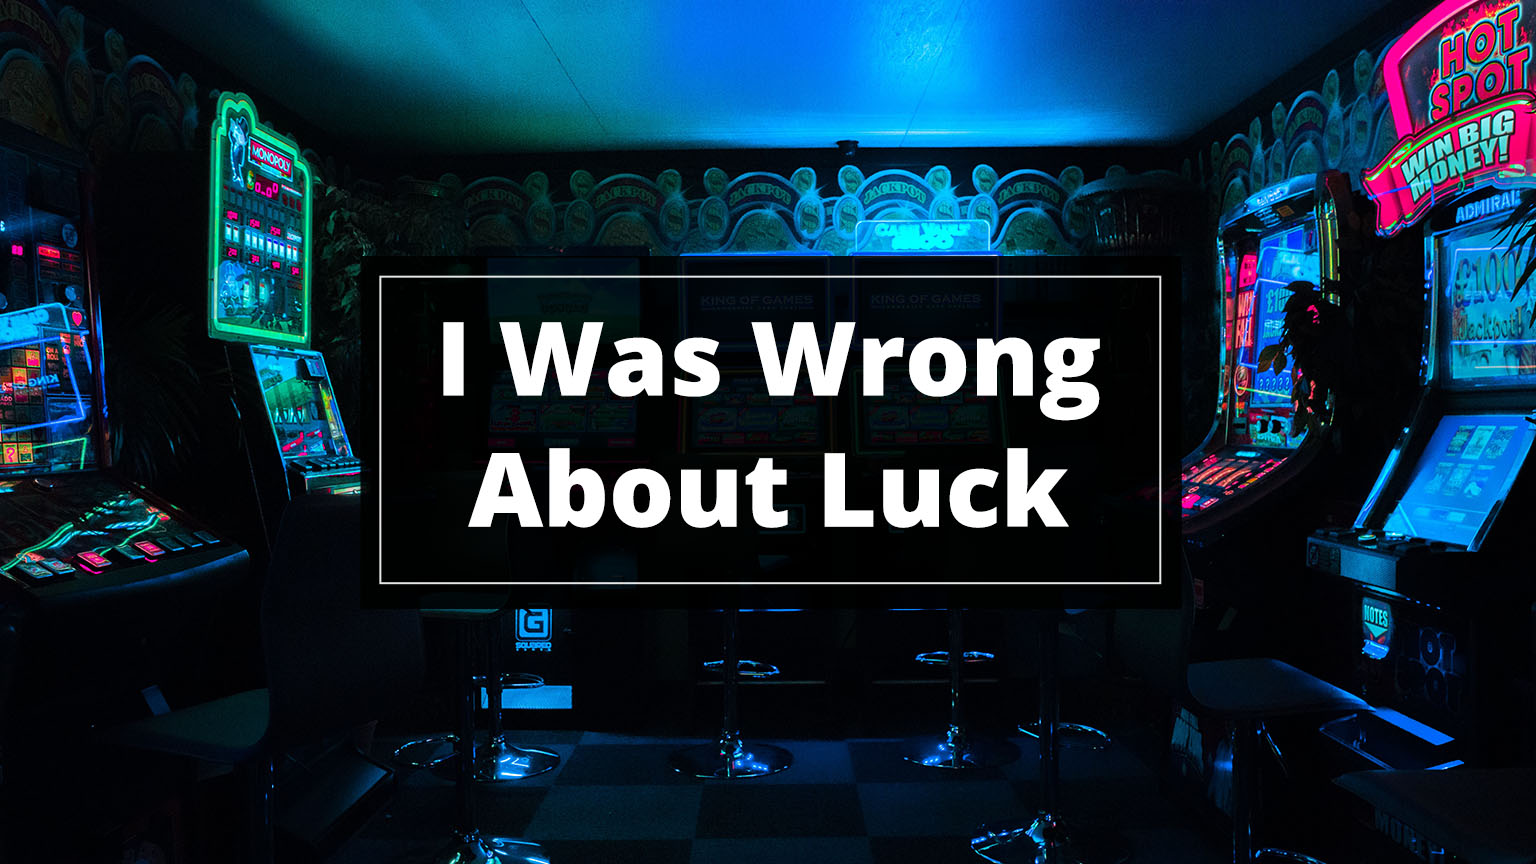 Luck cover - dark casino neon lights with title text